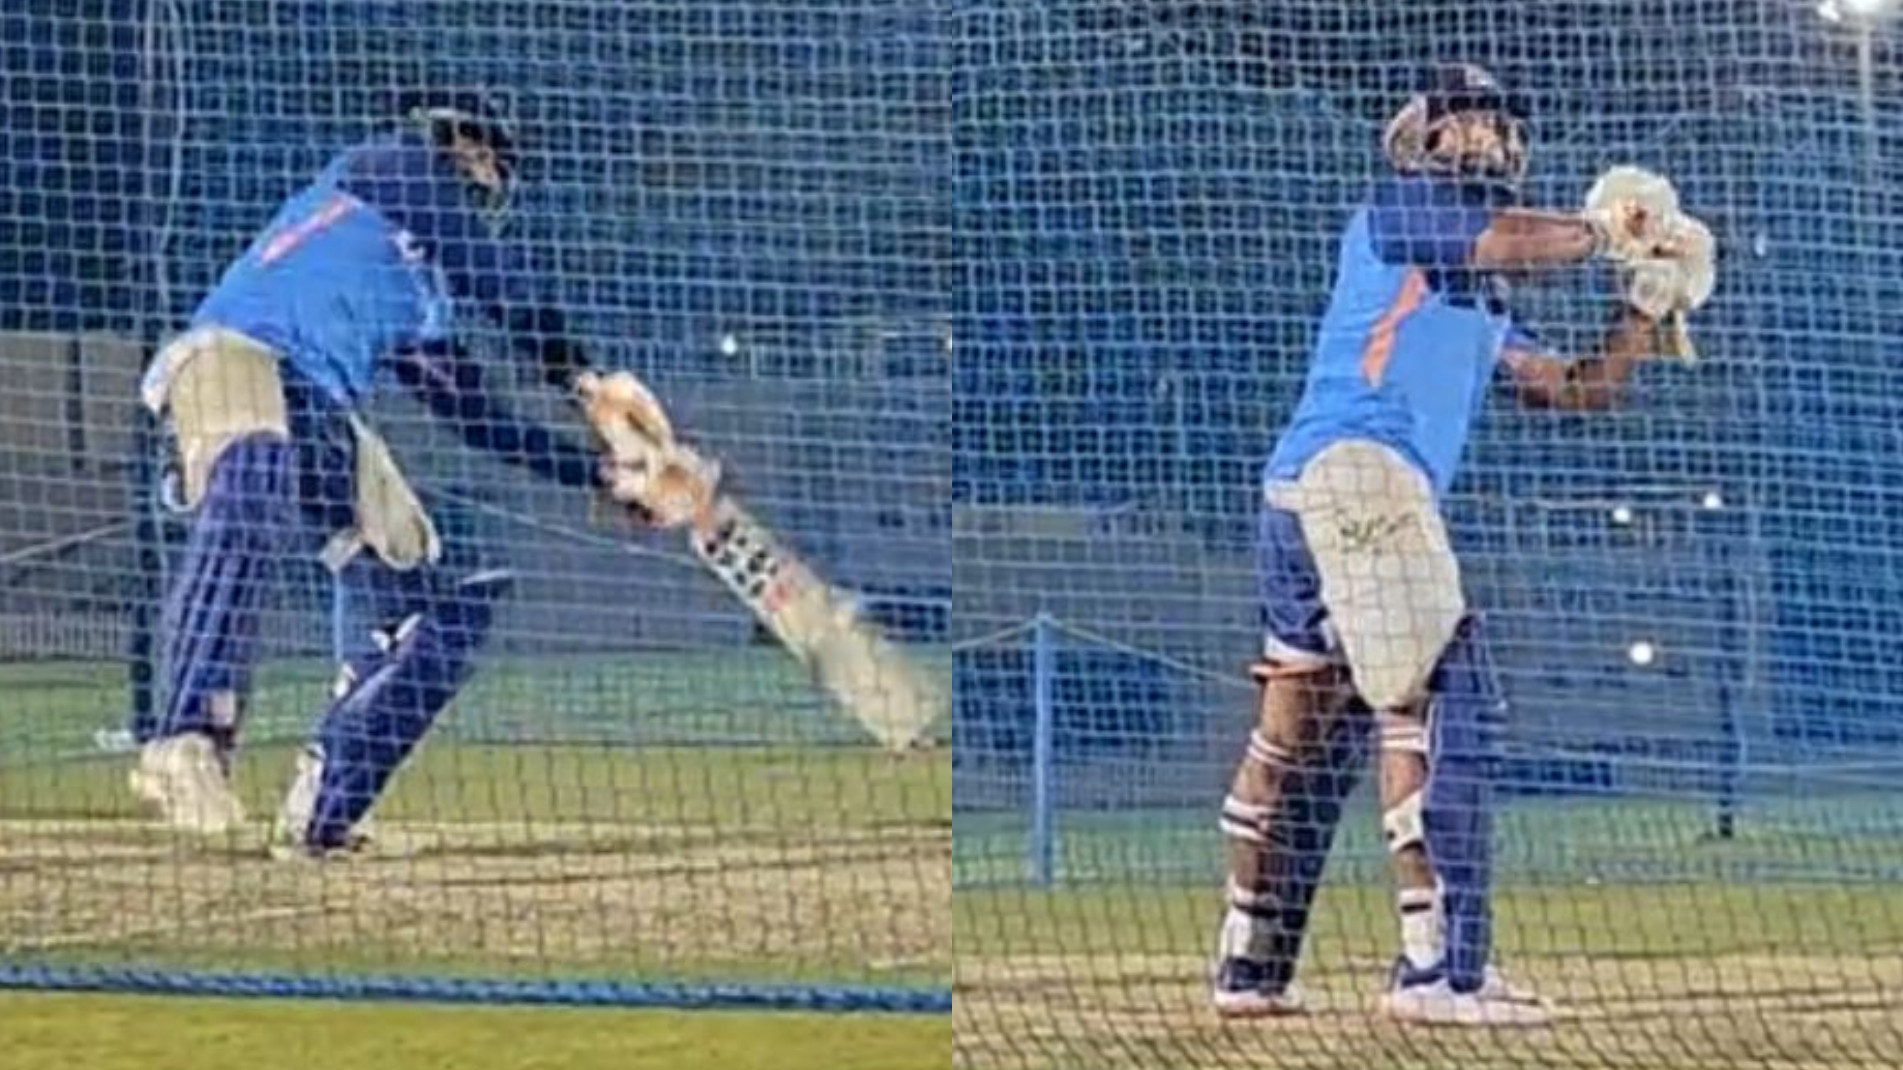 Asia Cup 2022: WATCH- Rishabh Pant and Ravindra Jadeja go ‘bang, bang’, show big-hitting prowess in India nets session